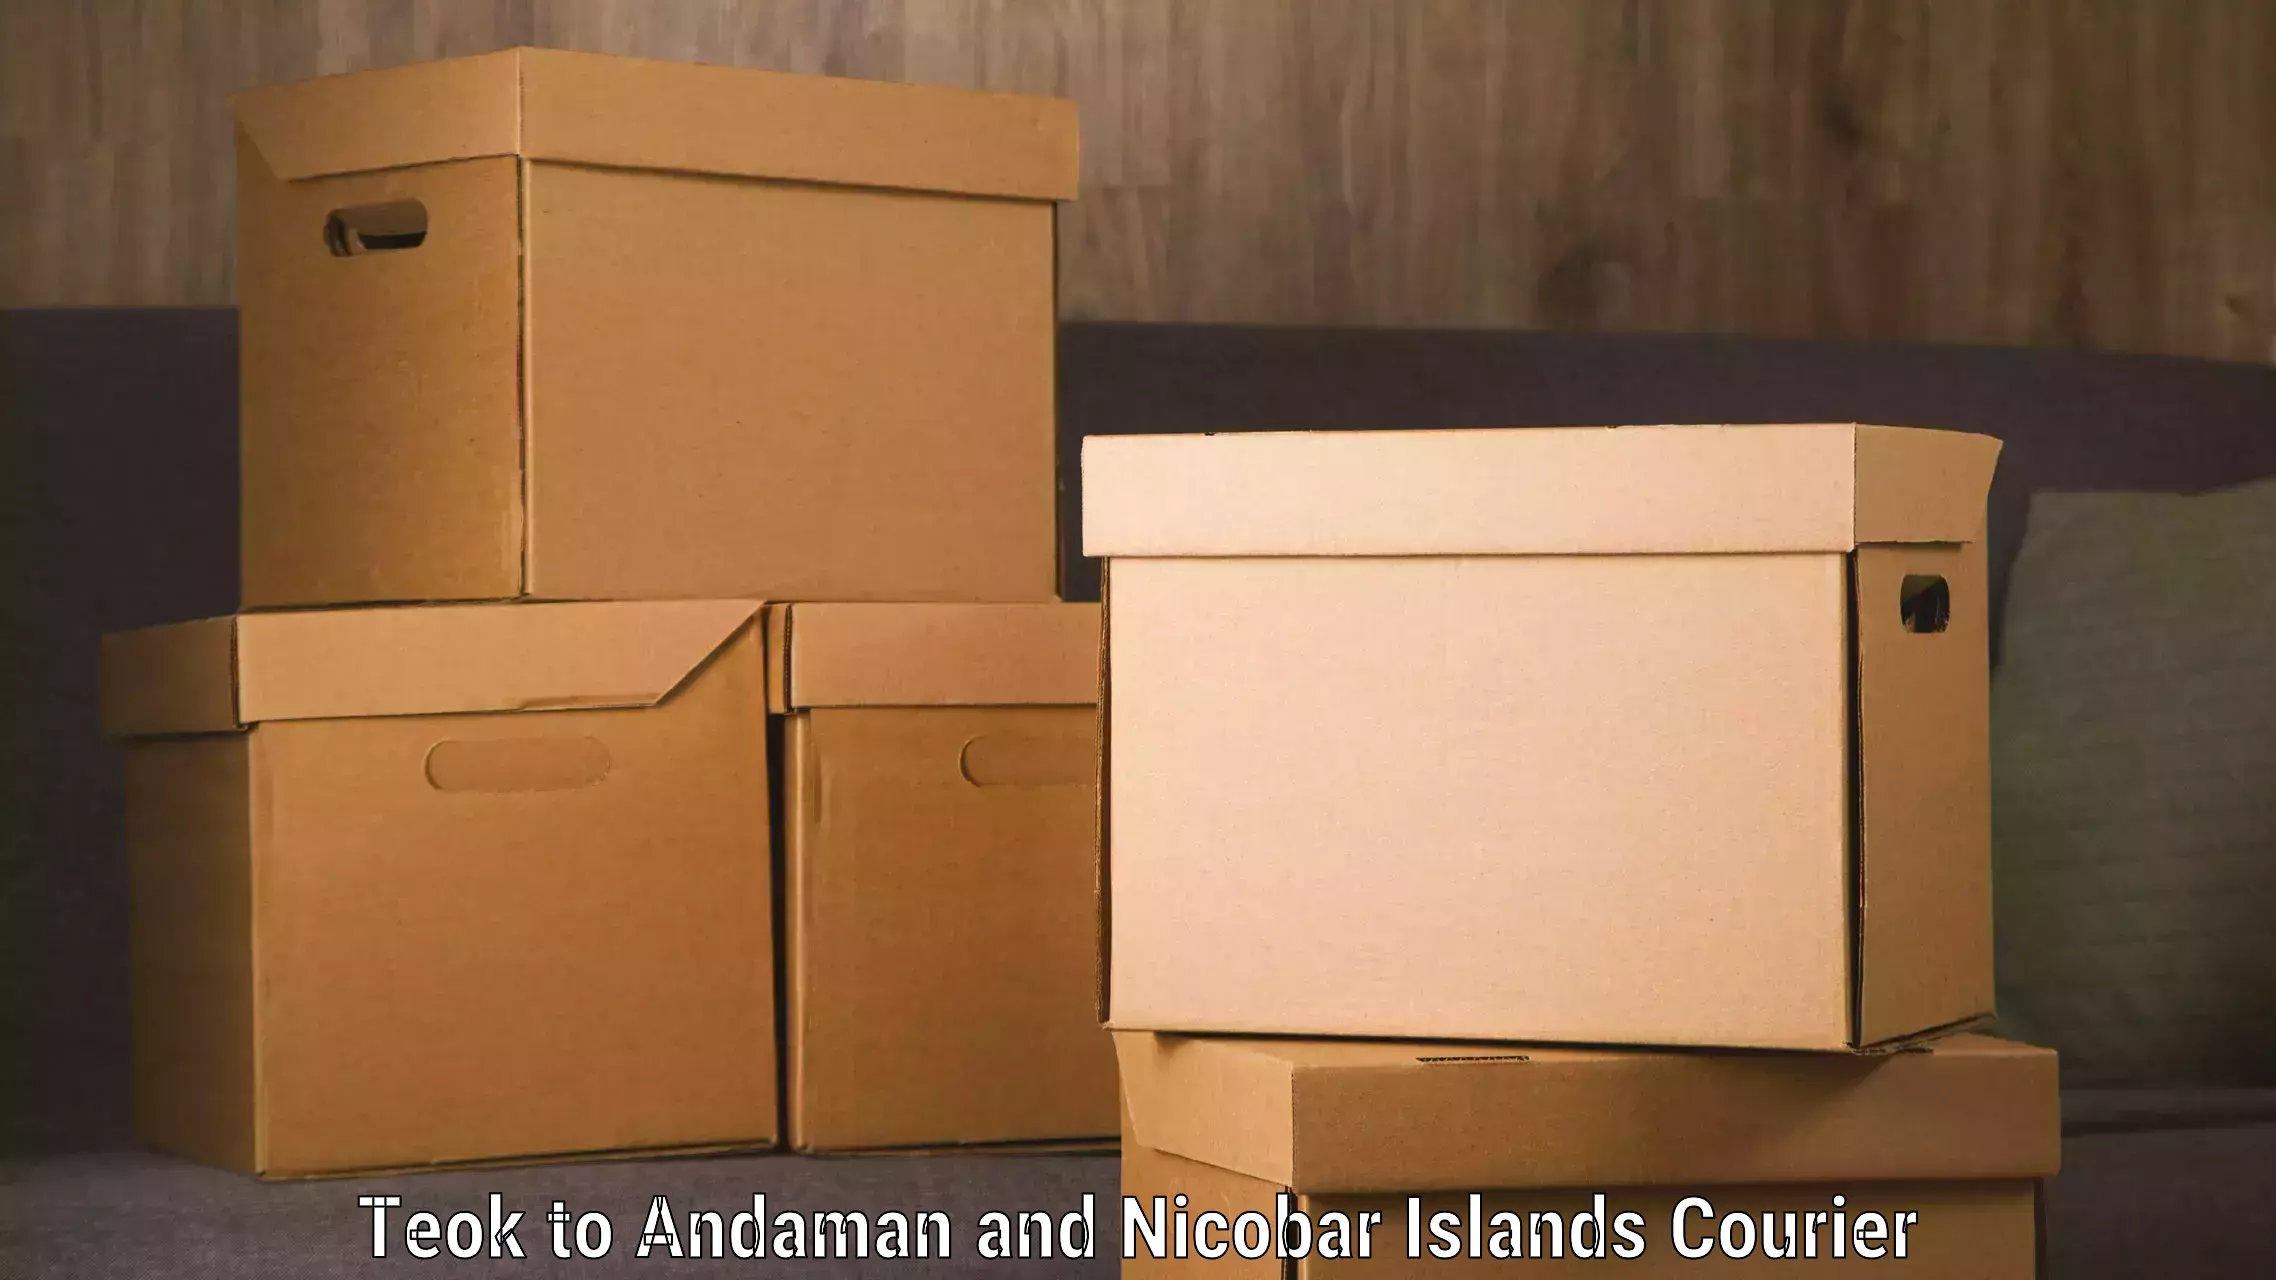 Urgent luggage shipment Teok to North And Middle Andaman